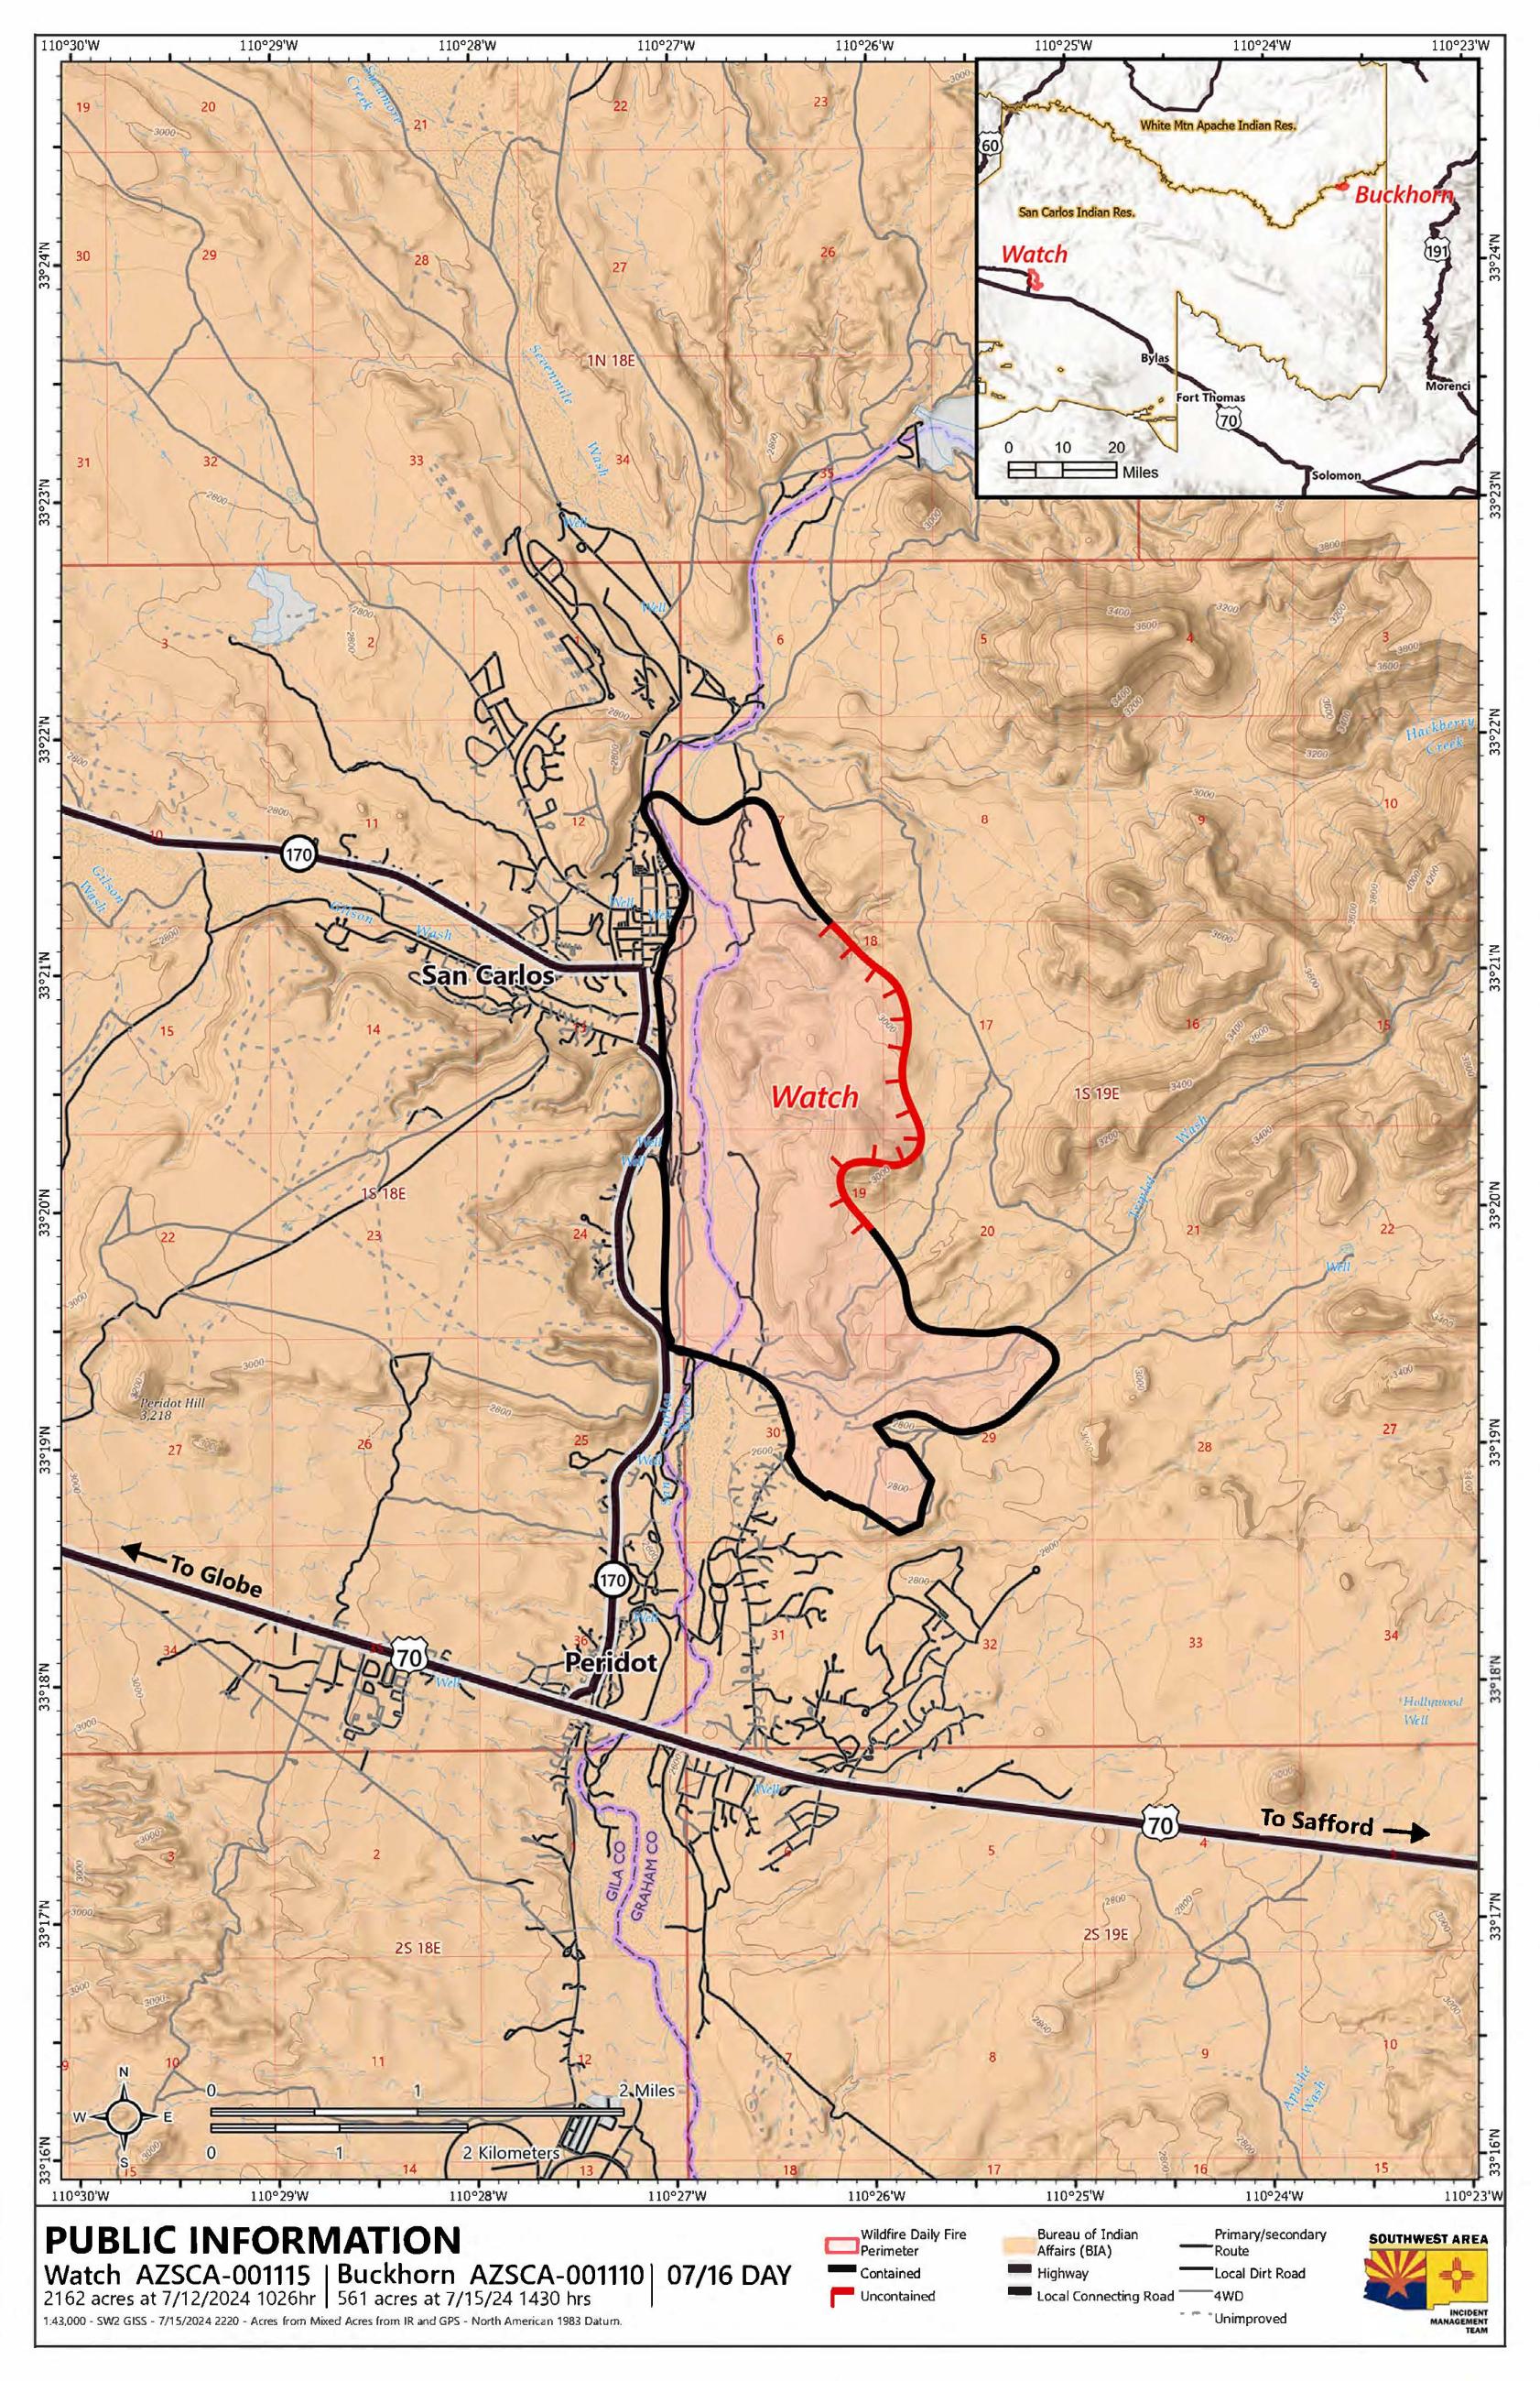 Map shows the location and perimeter for the Watch Fire and the location of the Buckhorn Fire. No growth was reported for either fire. 